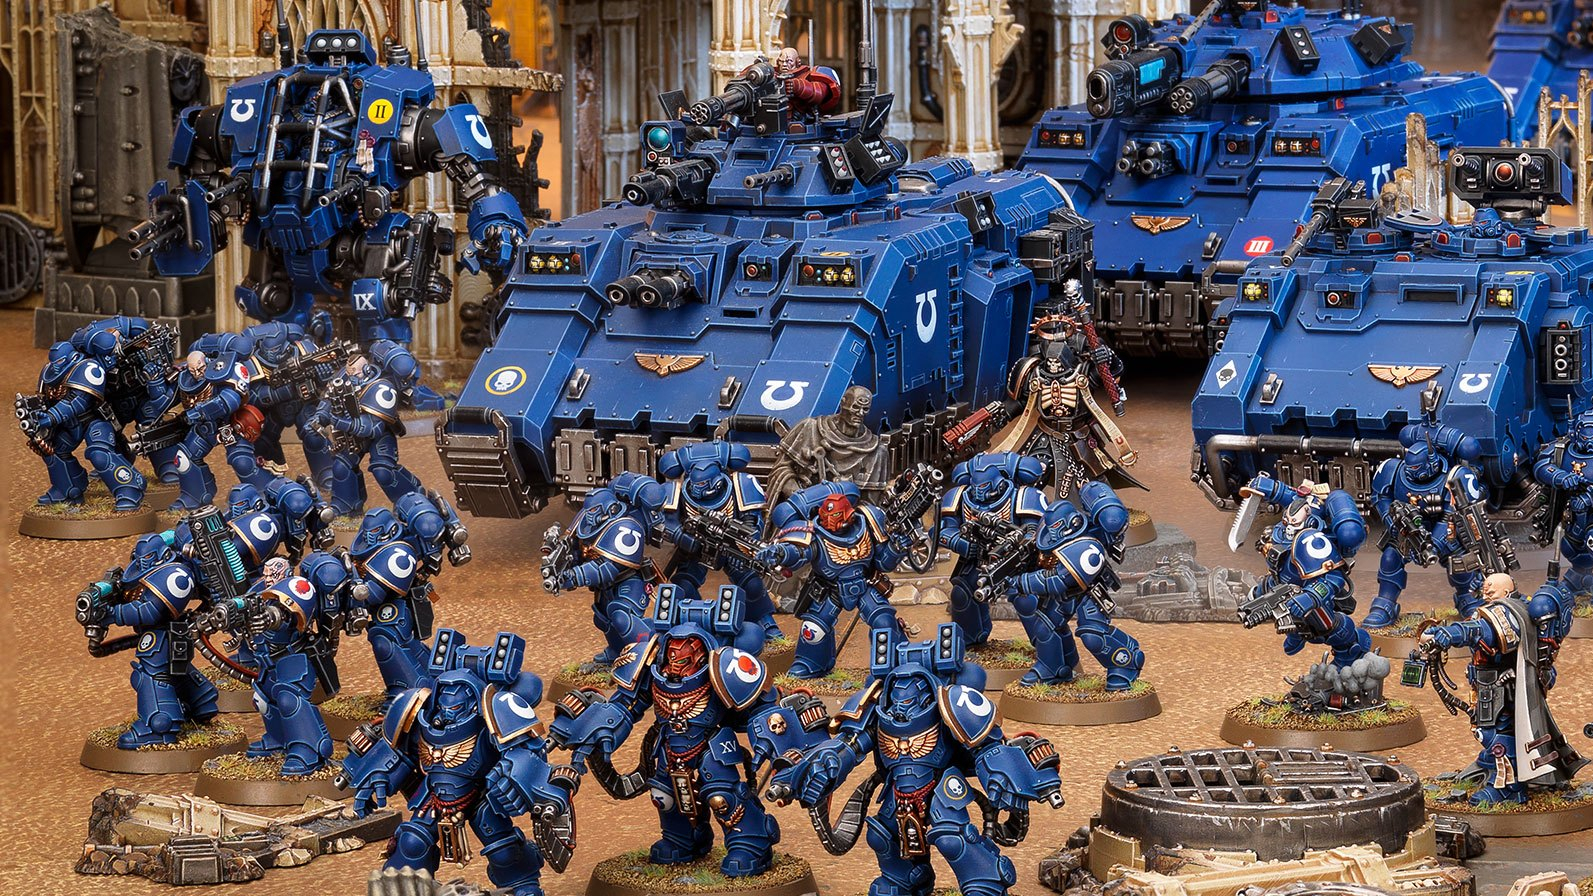 New miniature paint could be an alternative to Games Workshop